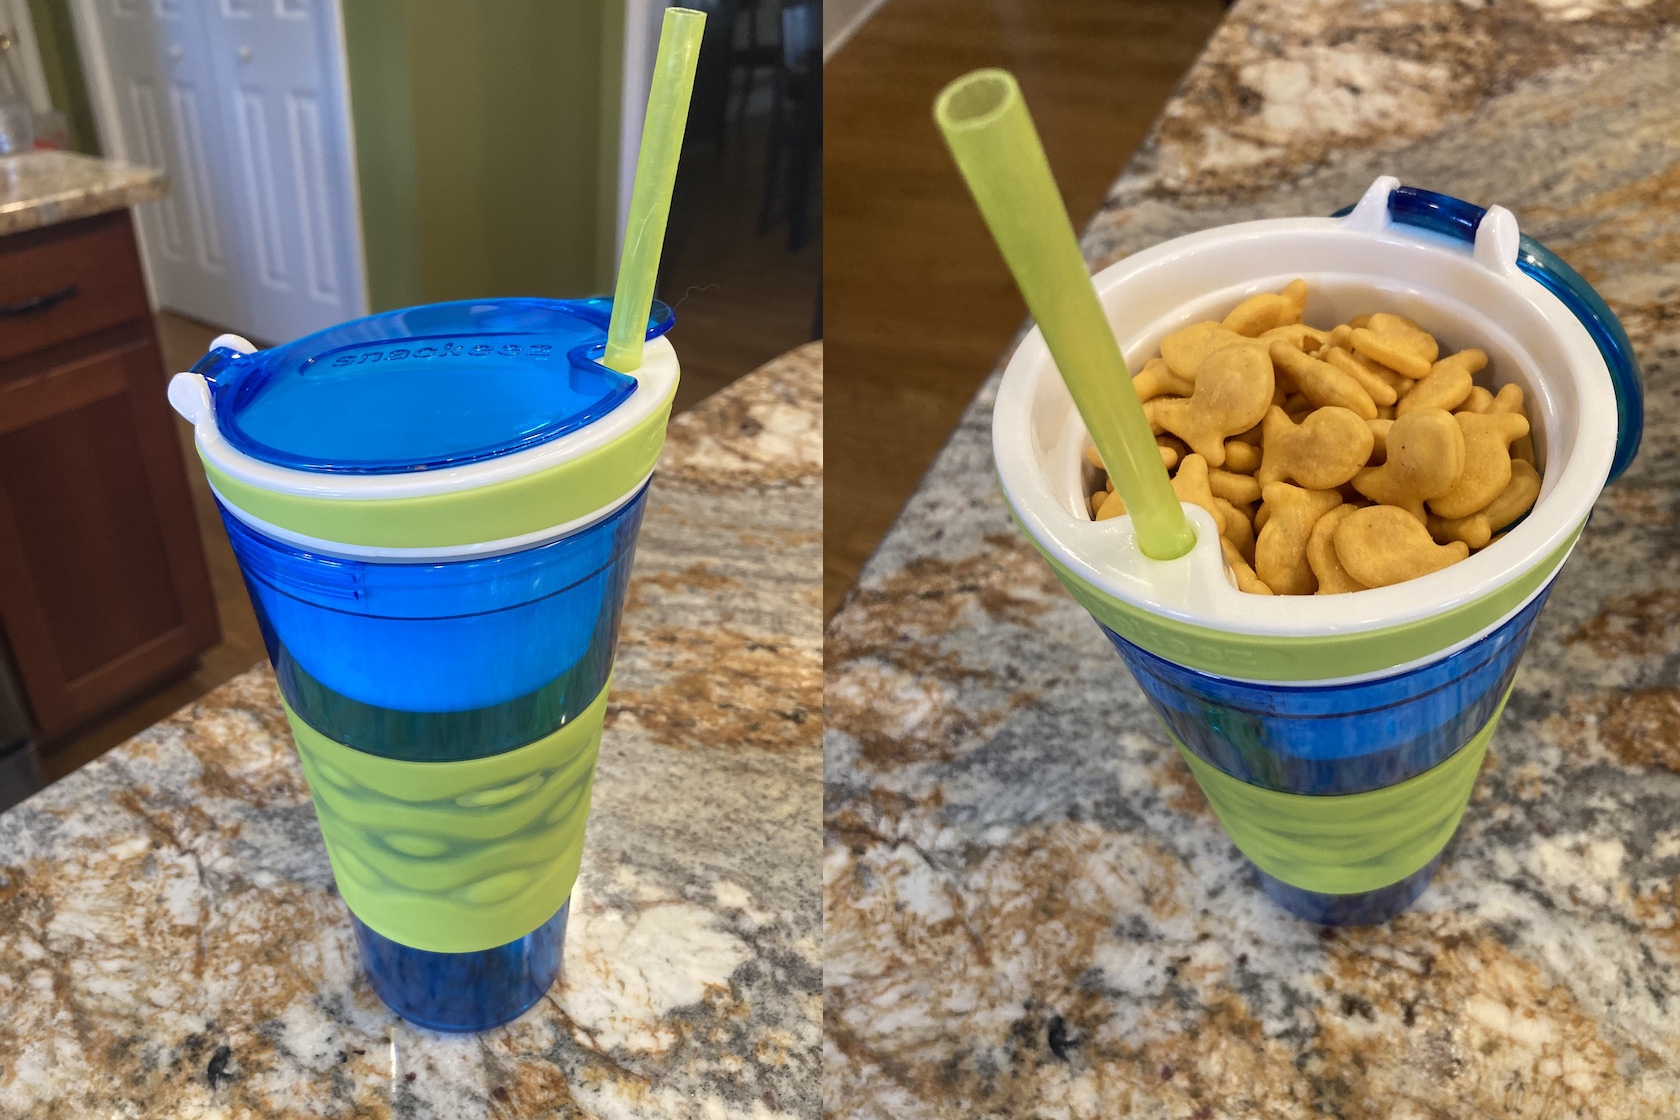 Snackeez cups make on-the-go snacking easy and mess-free